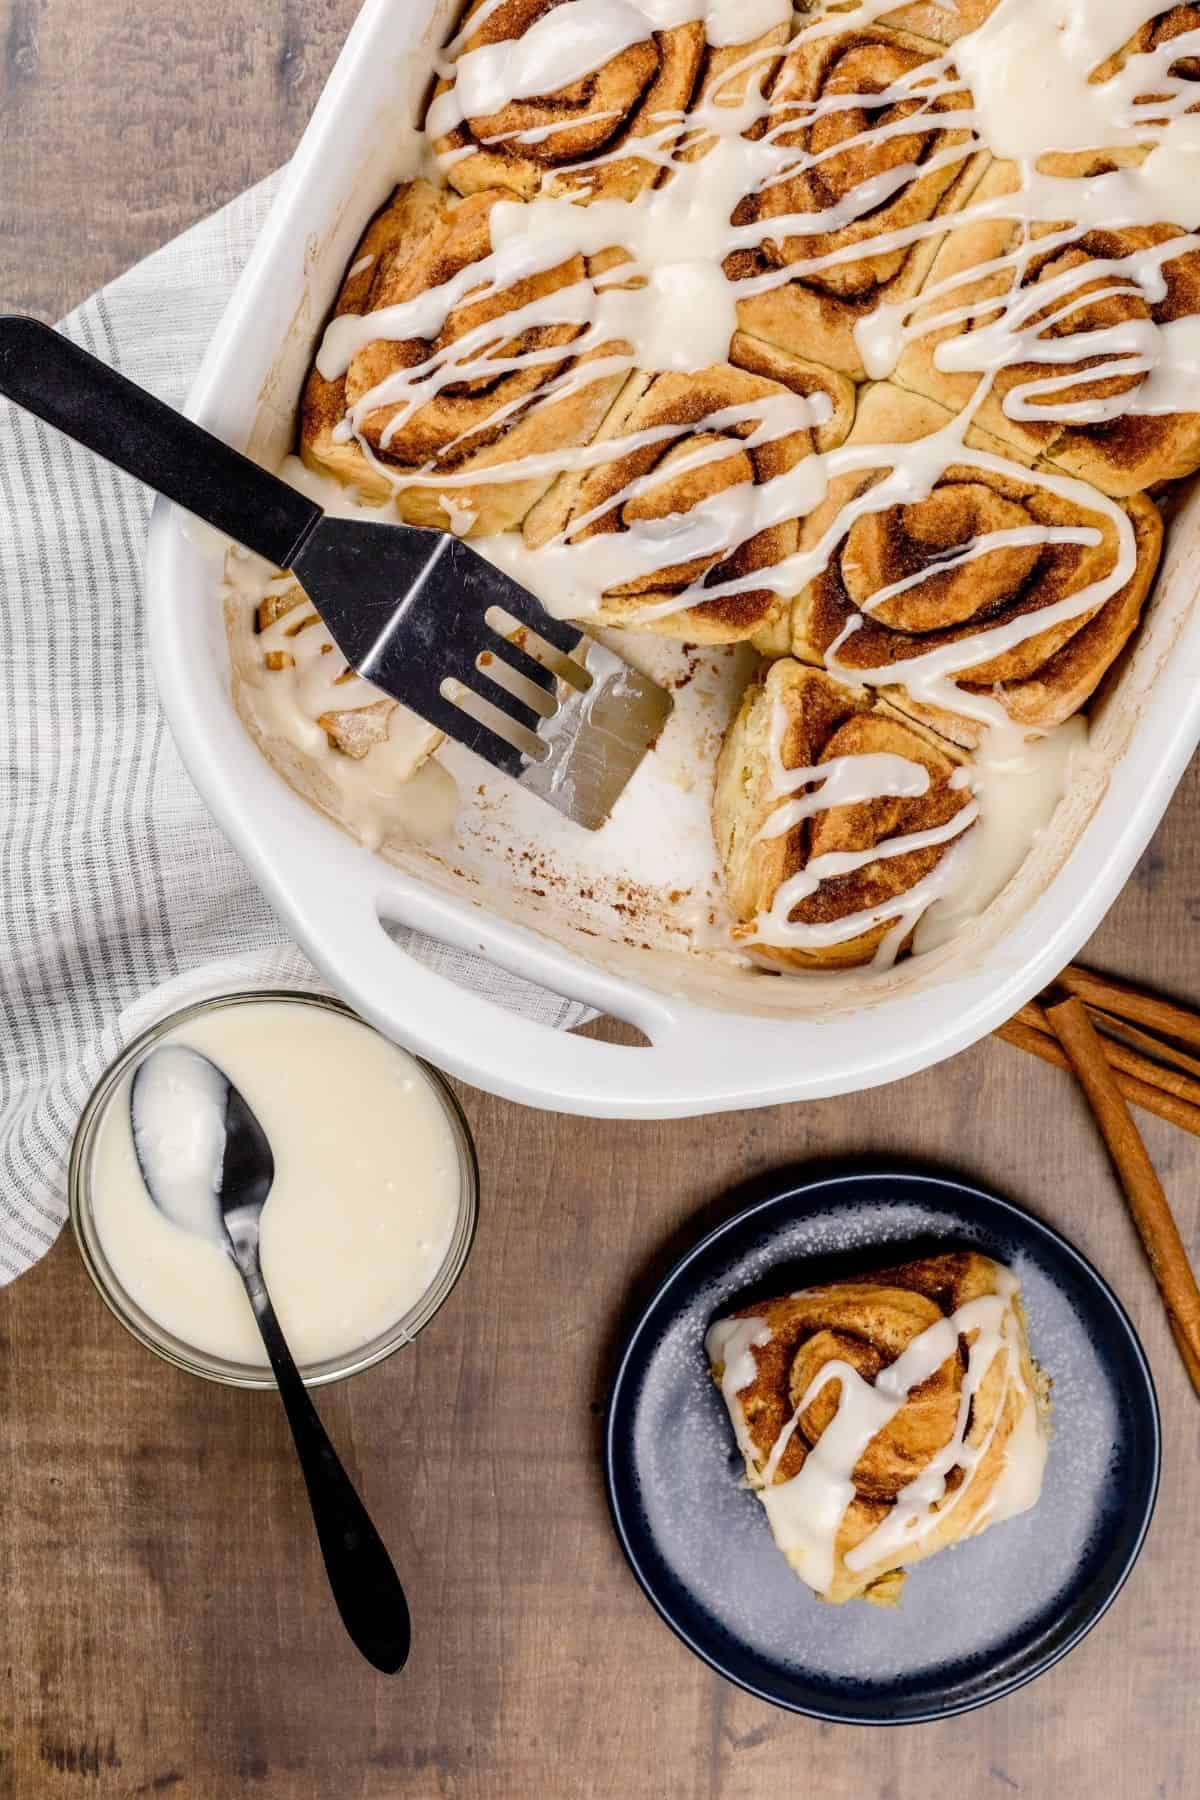 fully baked cinnamon rolls being served with a silver serving spoon. a roll is on a blue plate. the bowl of icing with a spoon is next to the plate.